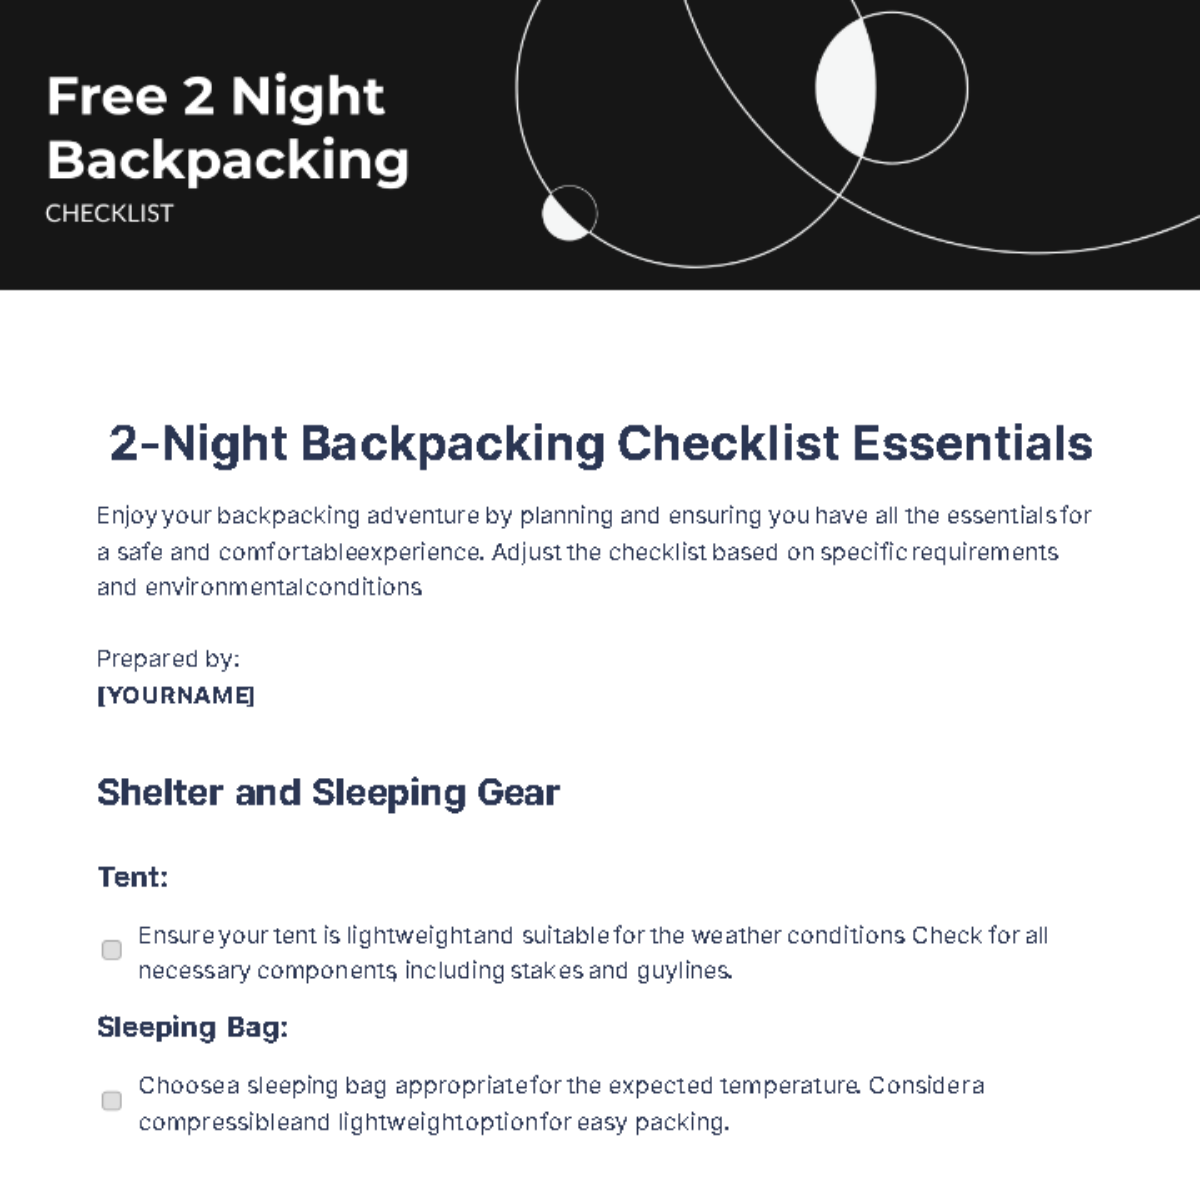 Free 2 Night Backpacking Checklist Template